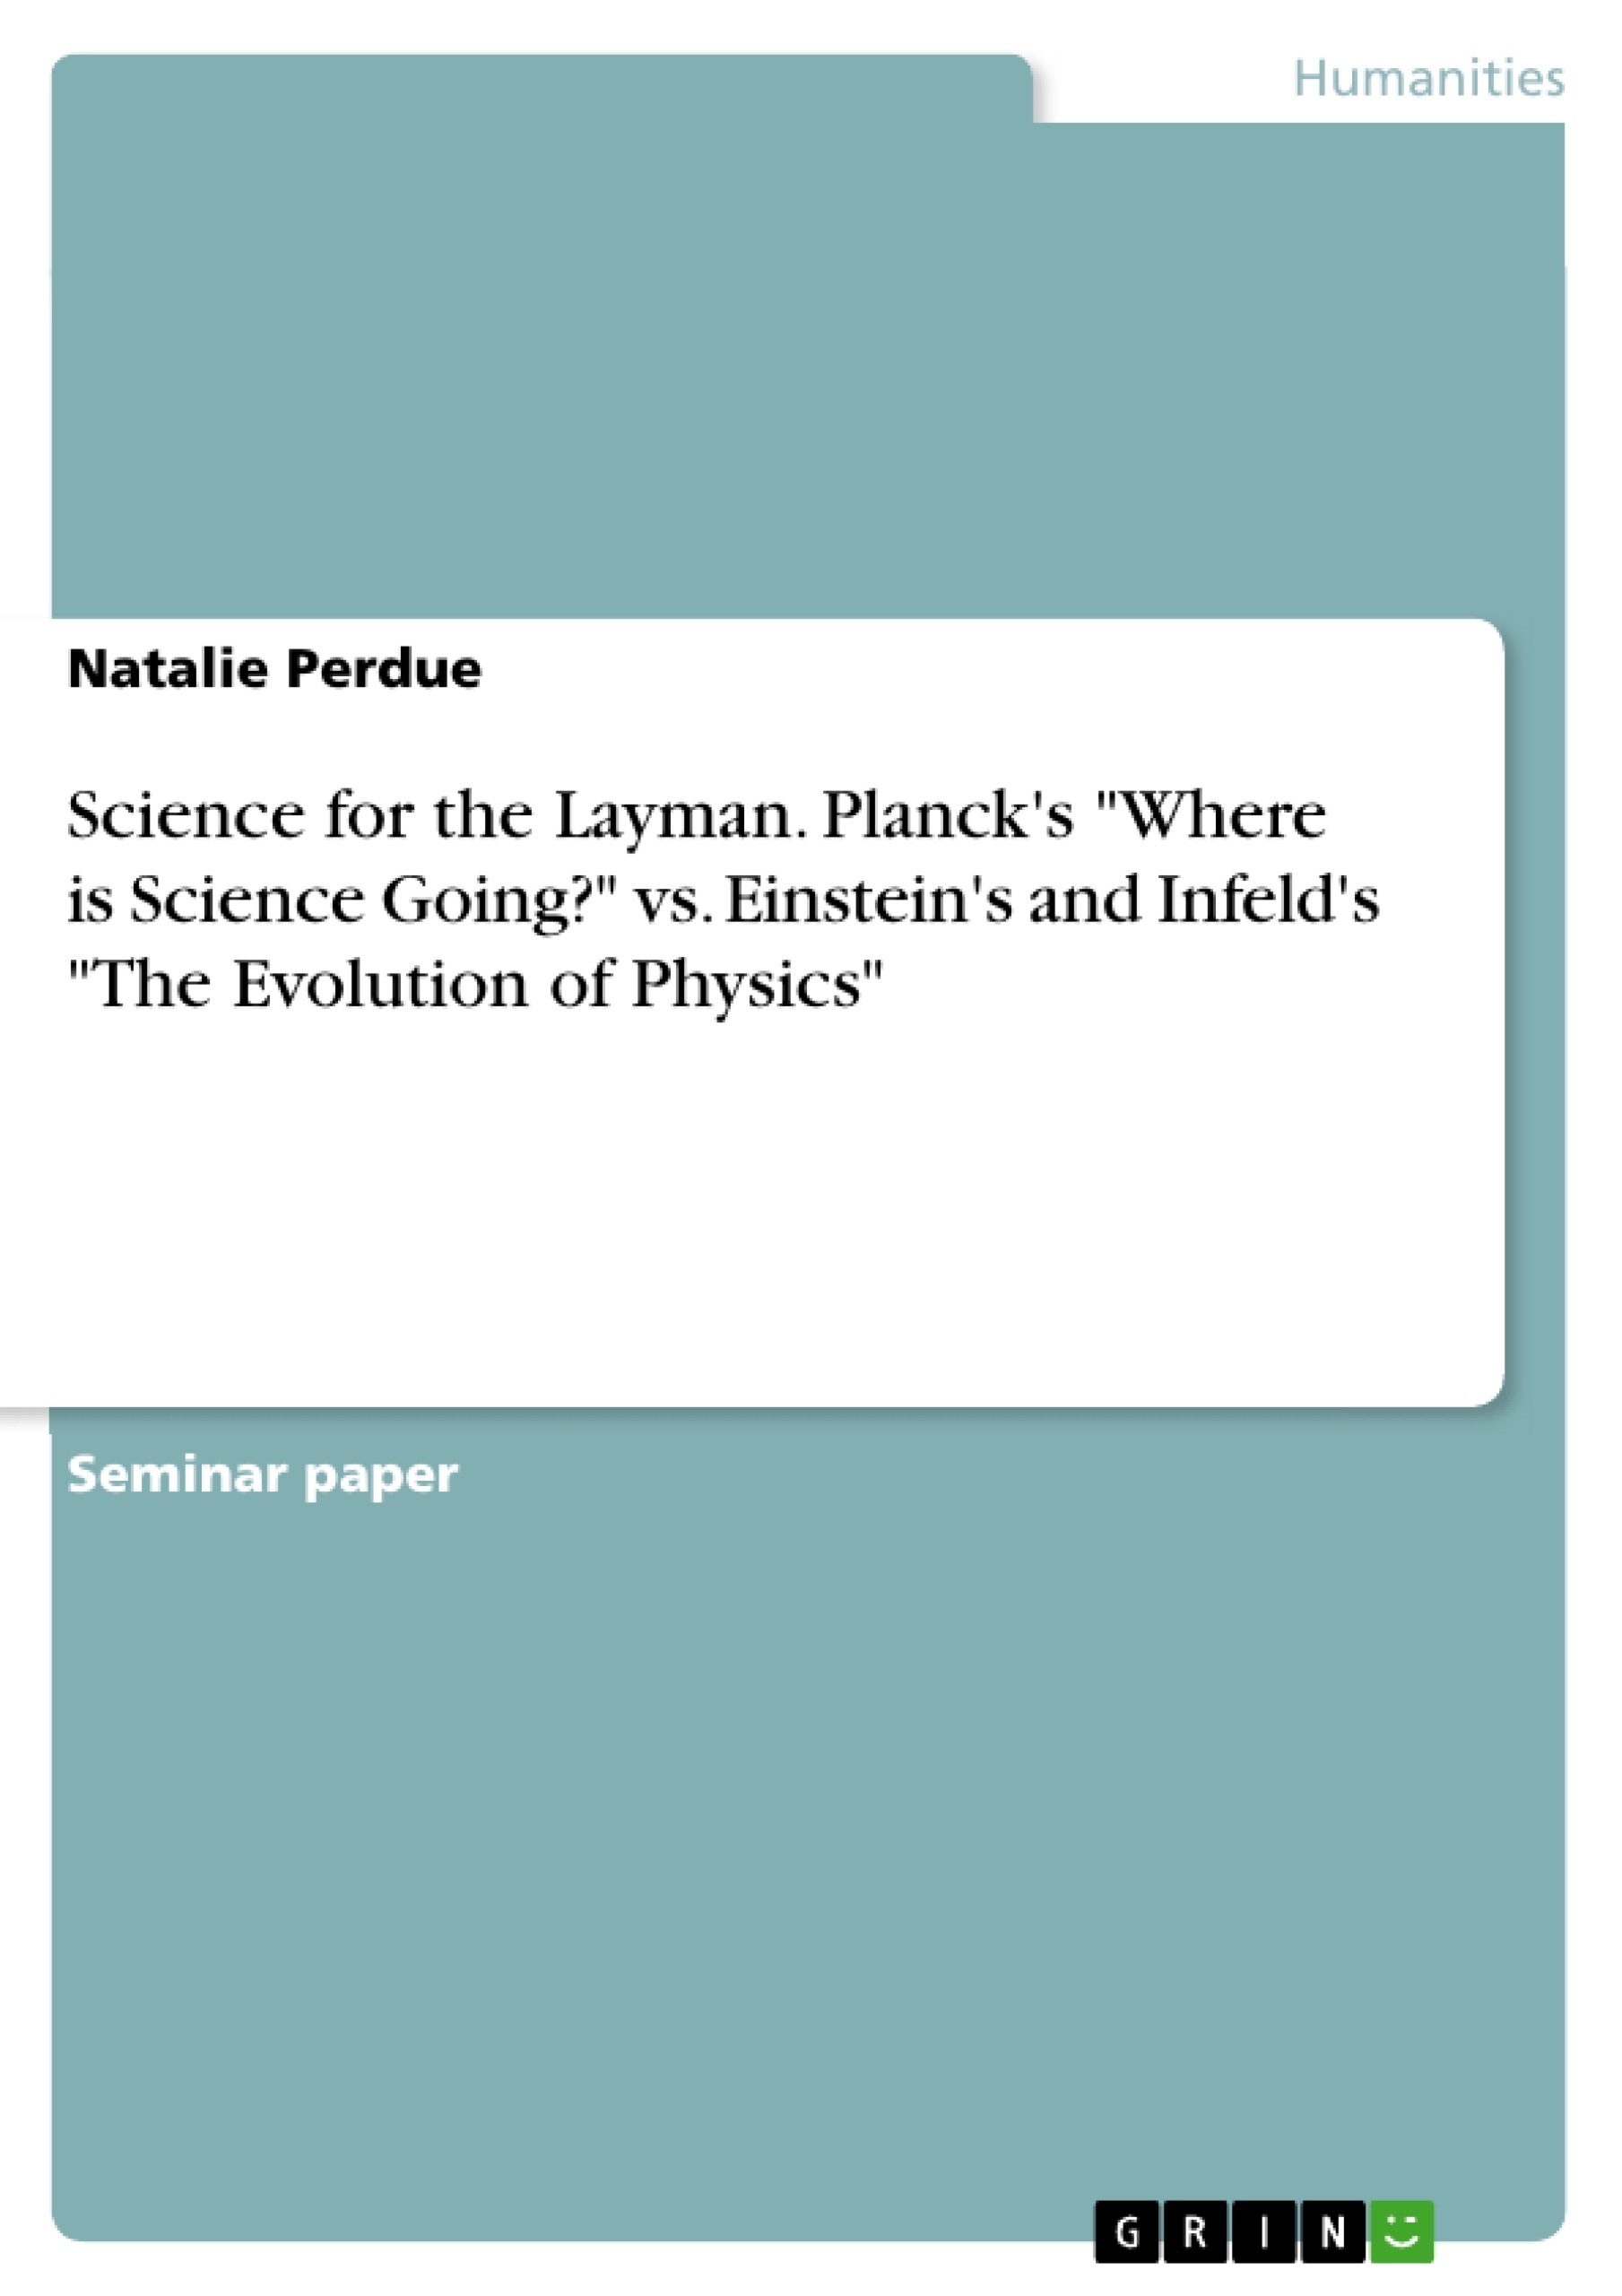 Title: Science for the Layman. Planck's "Where is Science Going?" vs. Einstein's and Infeld's "The Evolution of Physics"